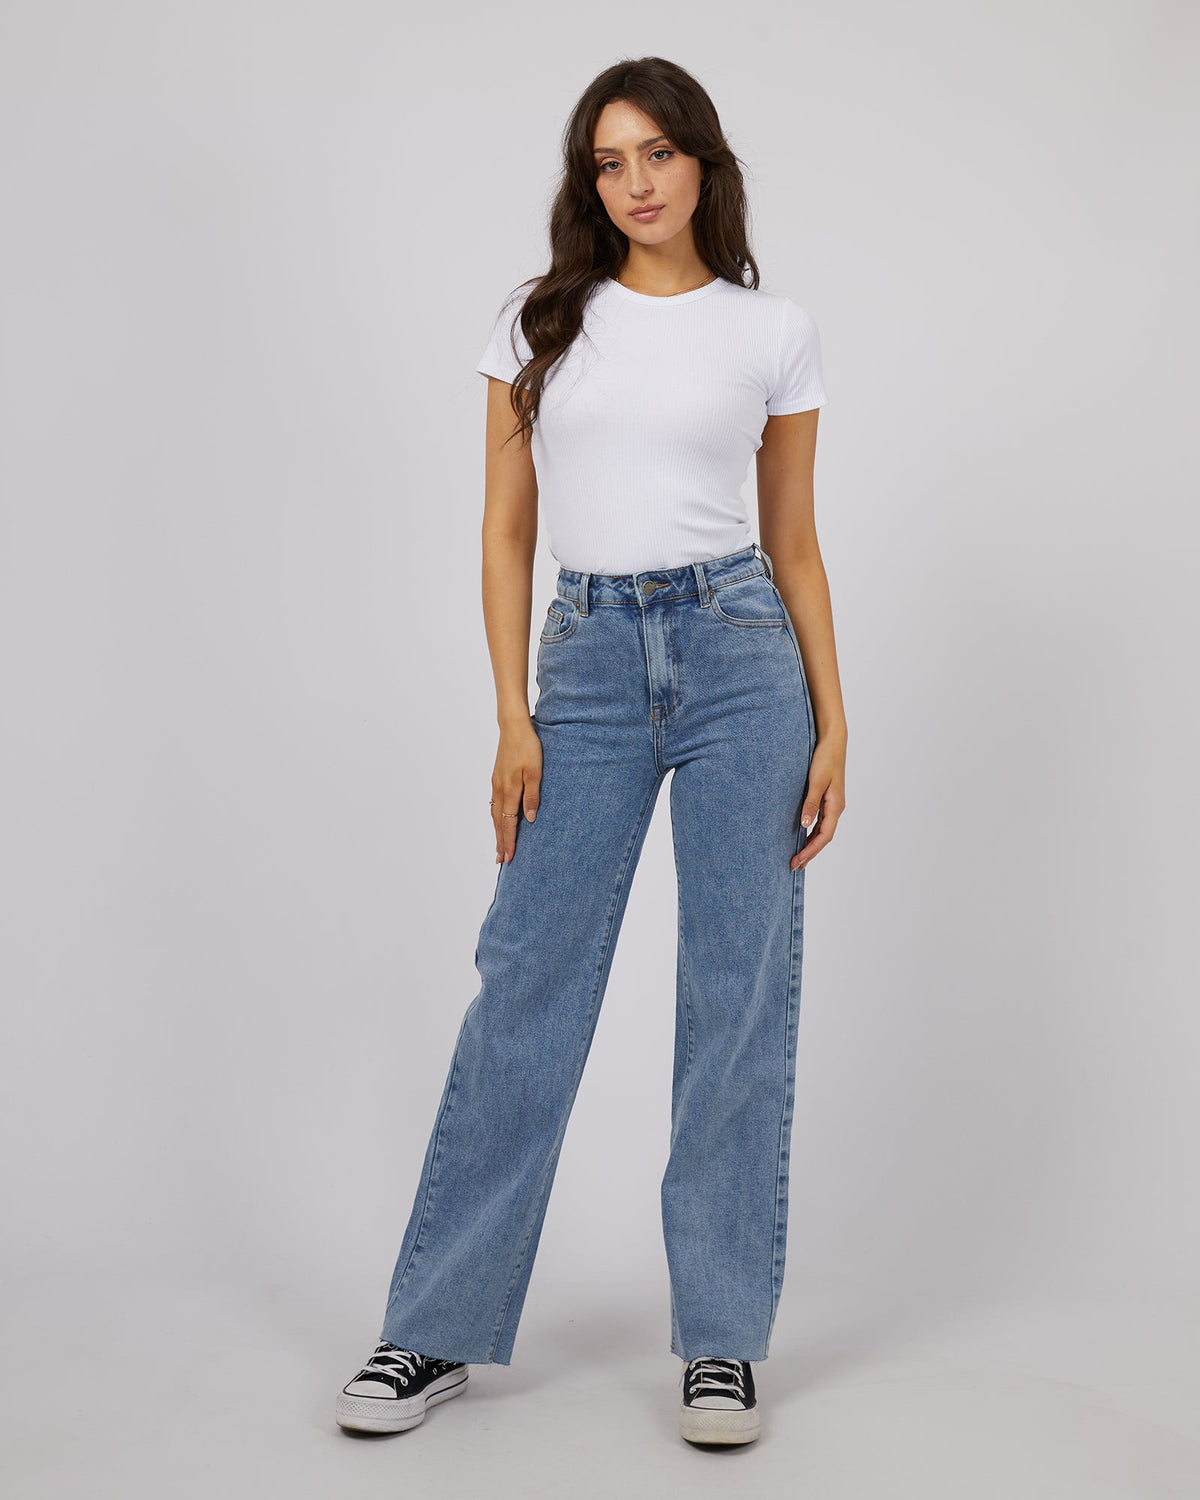 All About Eve-Skye Comfort Jean Heritage Blue-Edge Clothing